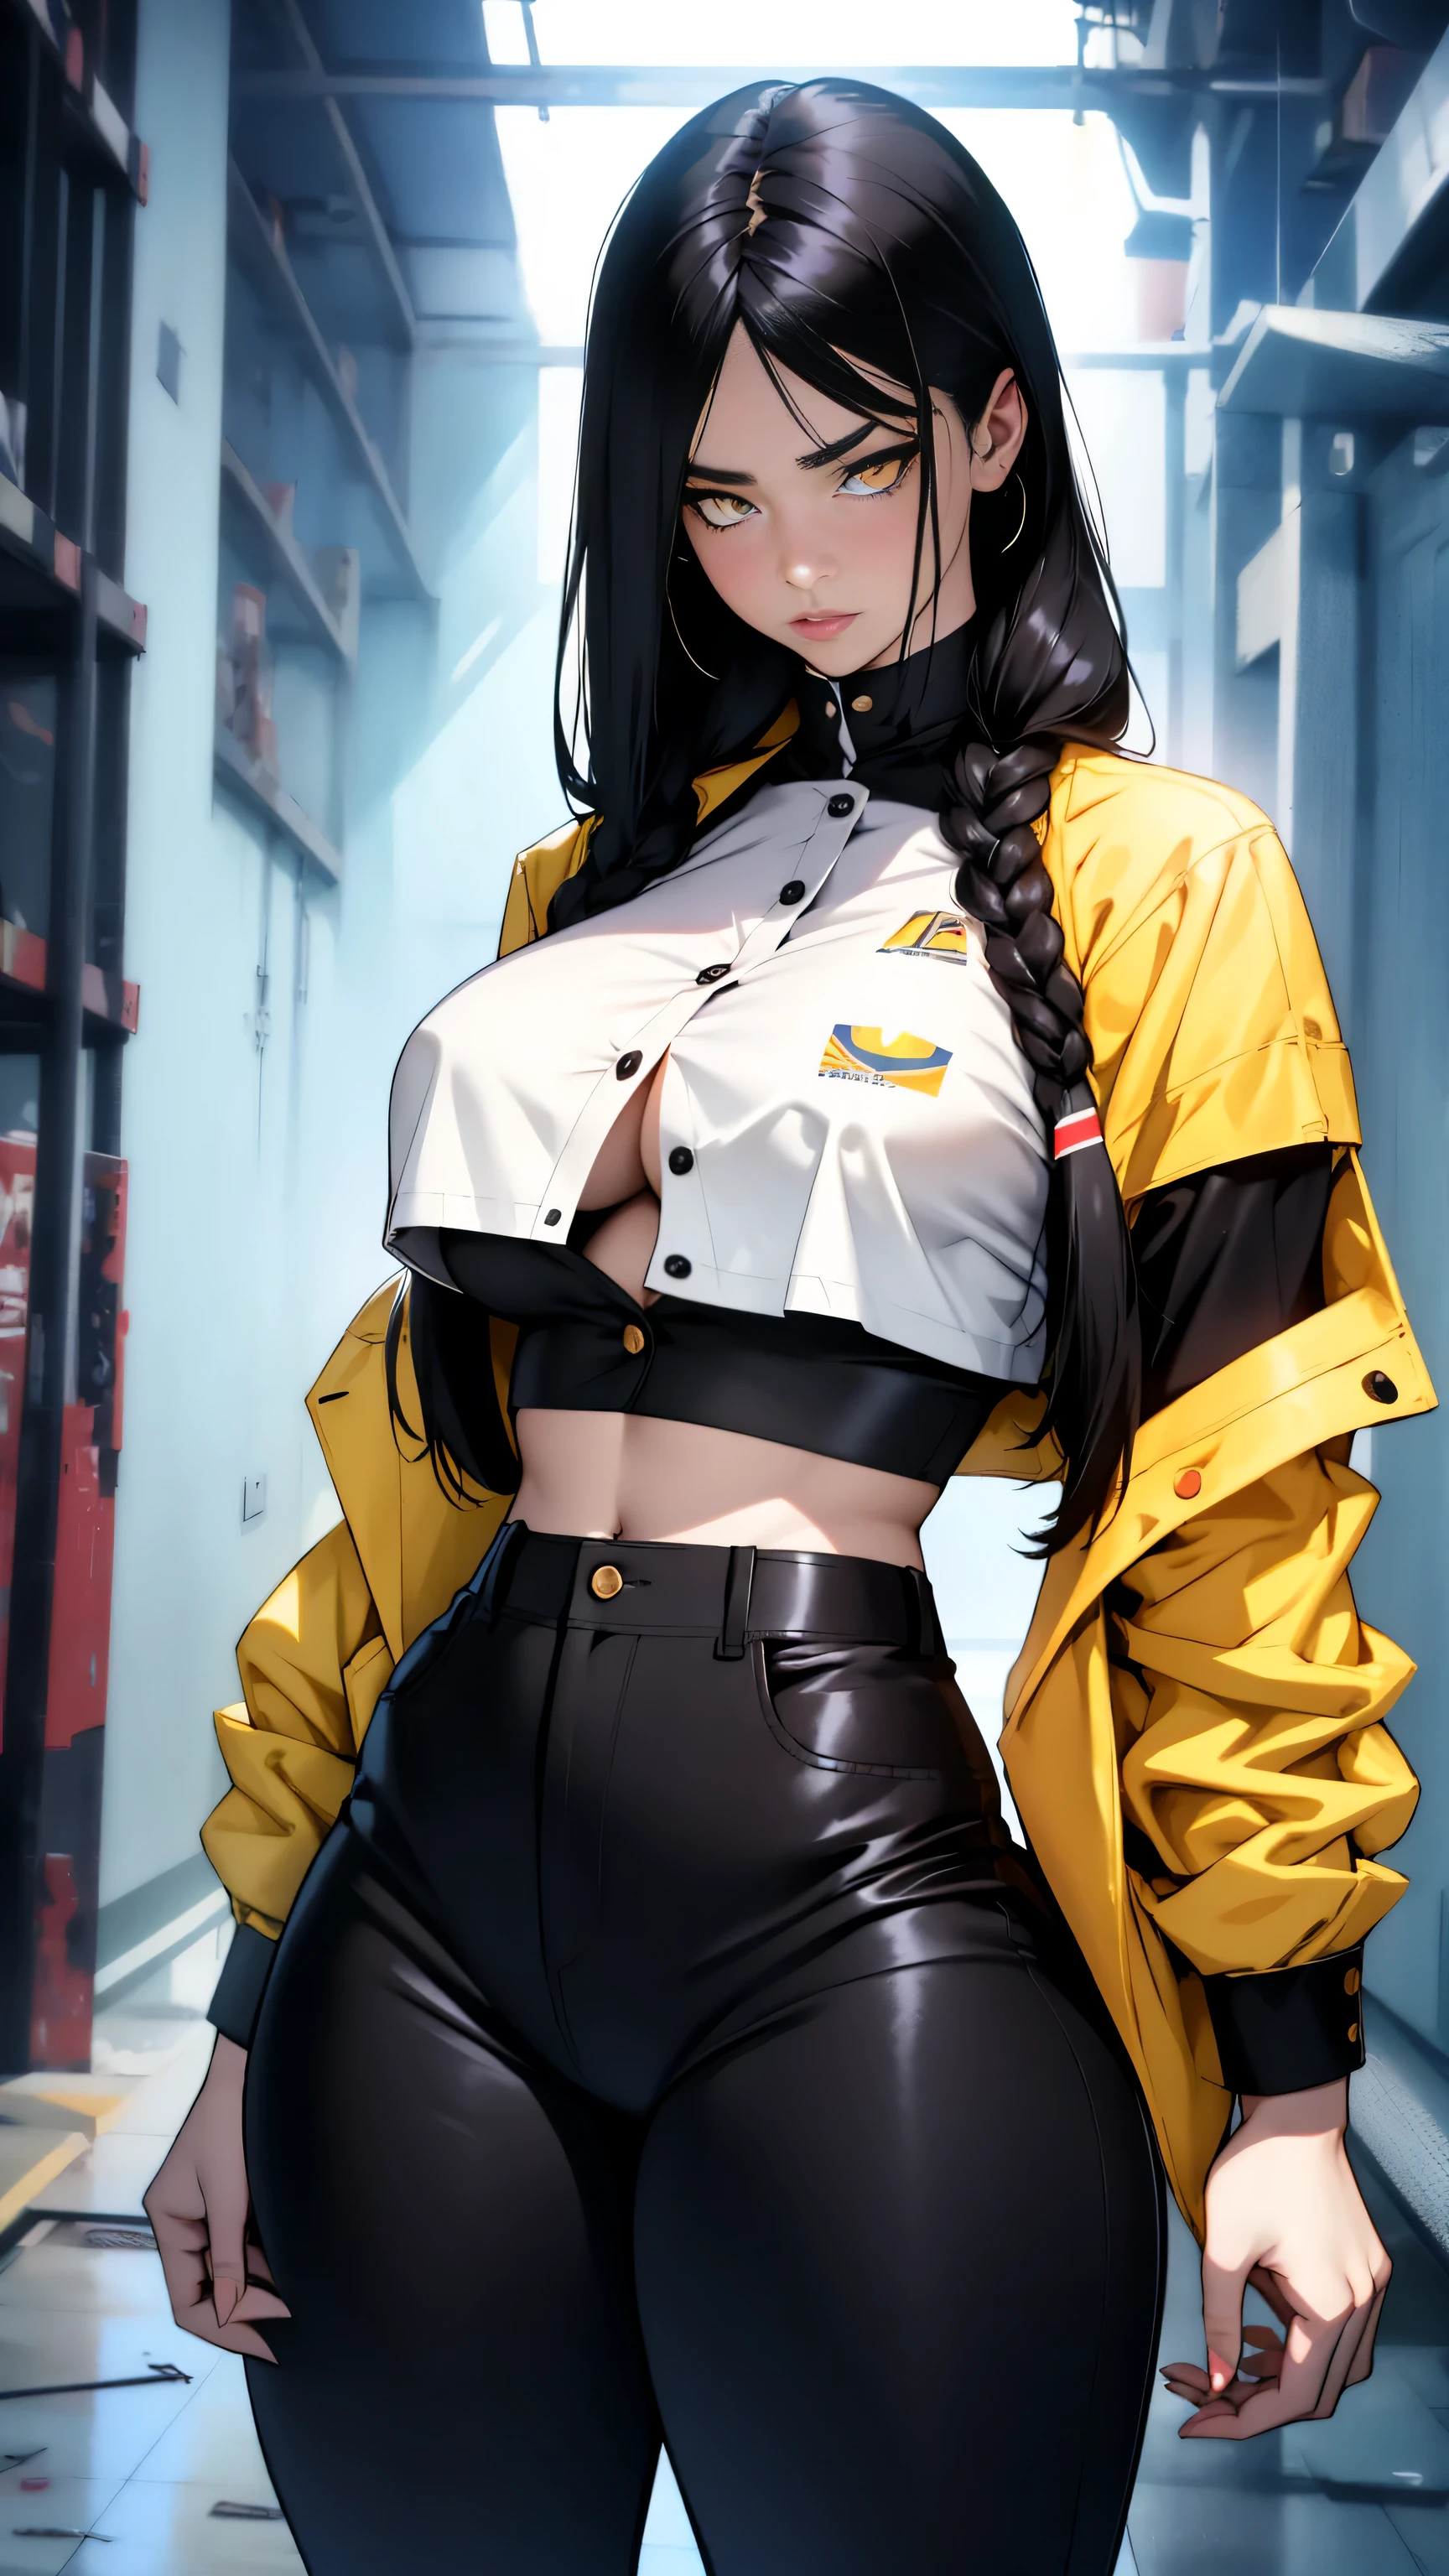 black hair, extremely long hair, yellow eyes, pale skin, muscular, large DD breasts, thick thighs, mad, Teachers uniform, 1 waifu woman, crop top shirt, shirt knotted from bottom, open shirt, no bra, flat stomach, busty, pouty lips, 